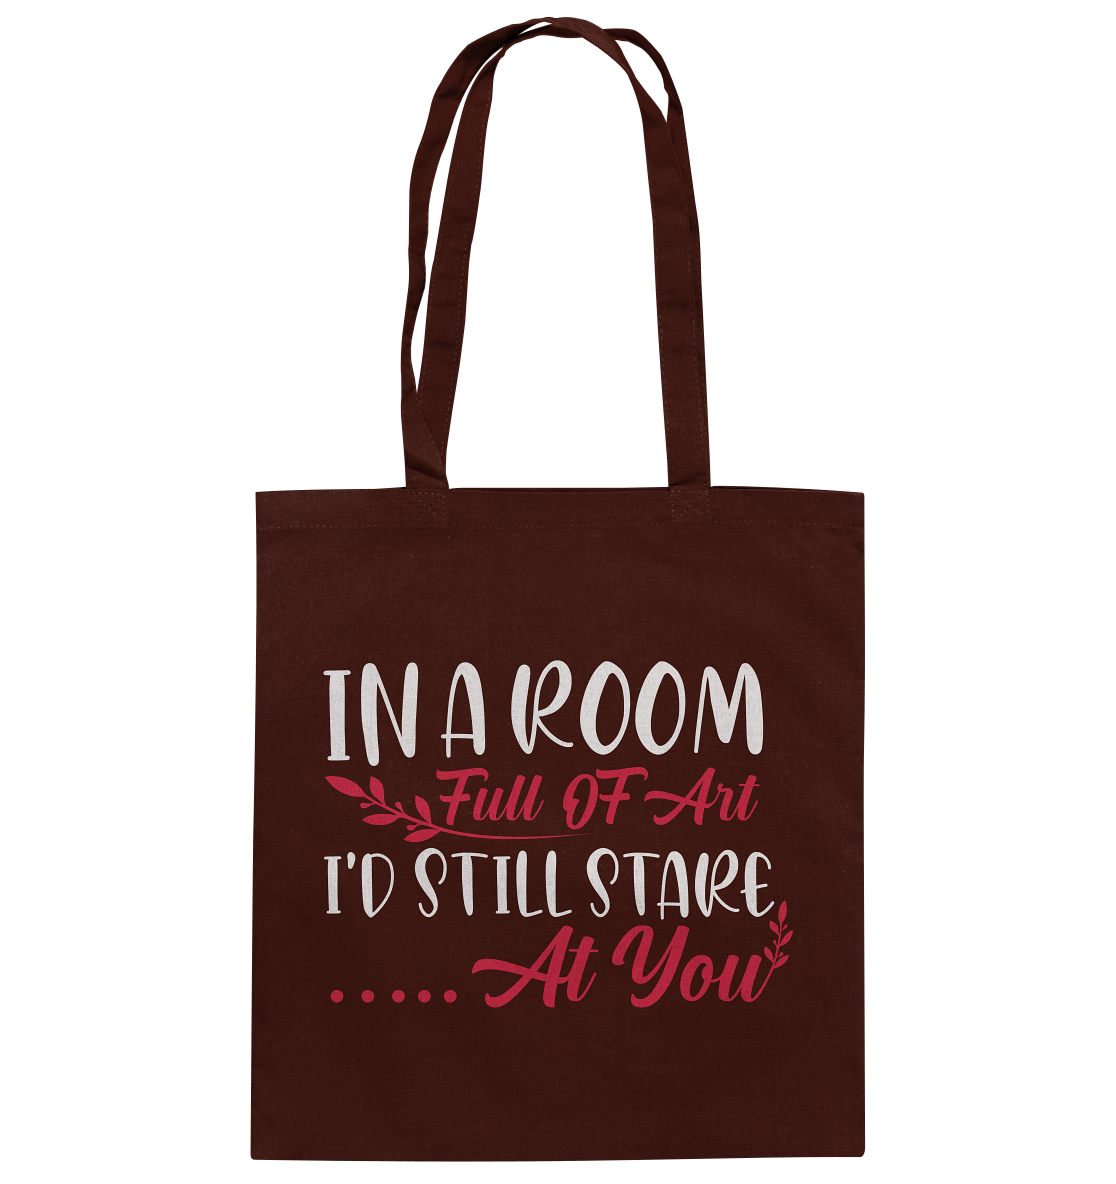 In a room full of art i'd still stare at you - cotton bag